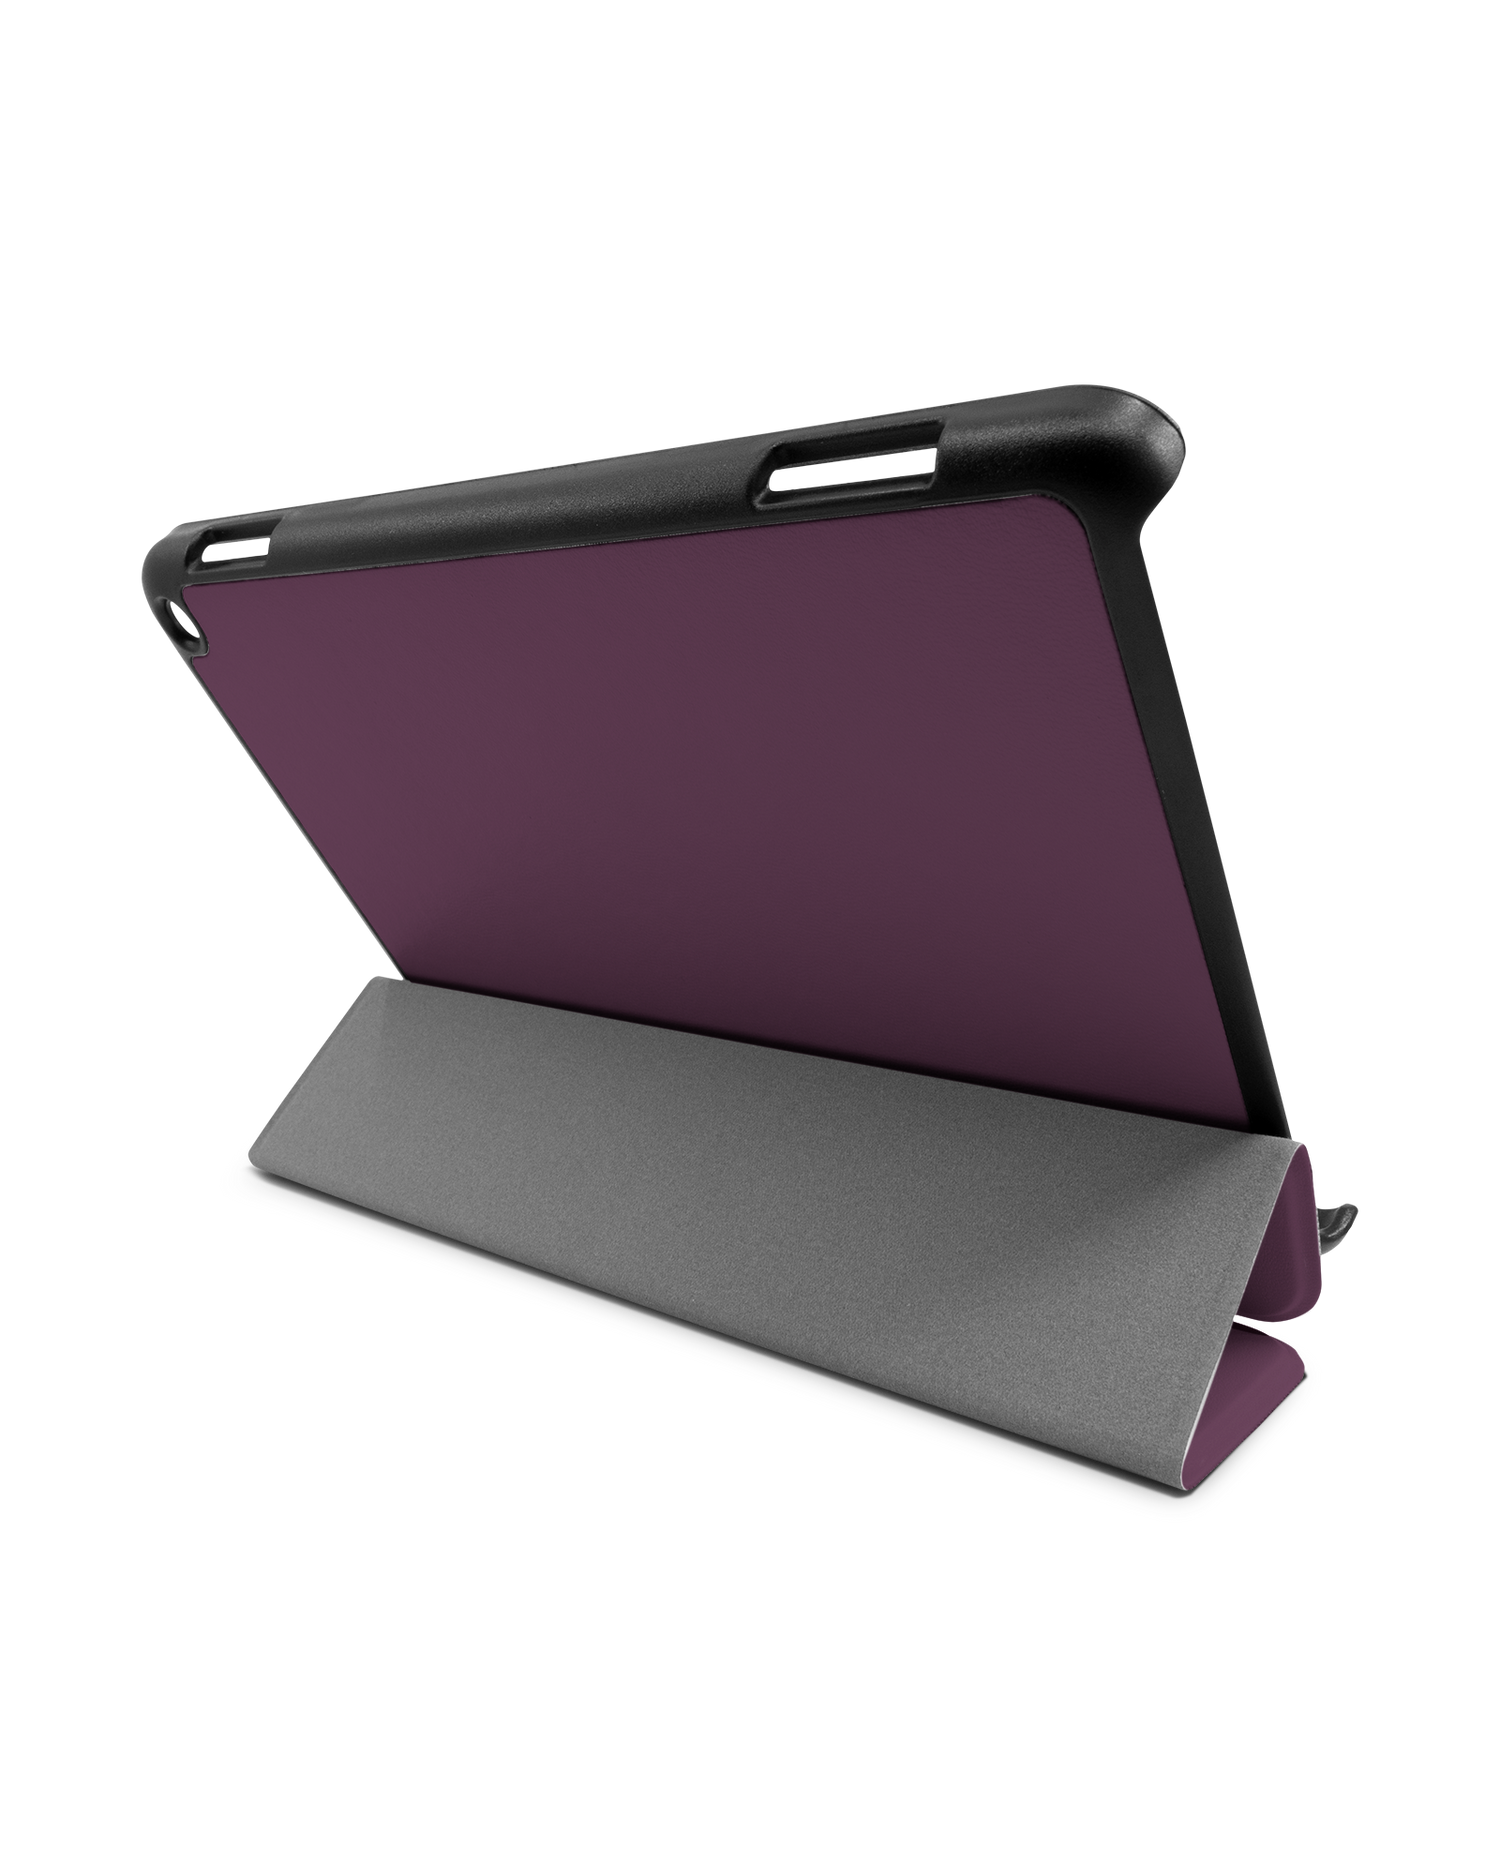 PLUM Tablet Smart Case for Amazon Fire HD 8 (2022), Amazon Fire HD 8 Plus (2022), Amazon Fire HD 8 (2020), Amazon Fire HD 8 Plus (2020): Used as Stand